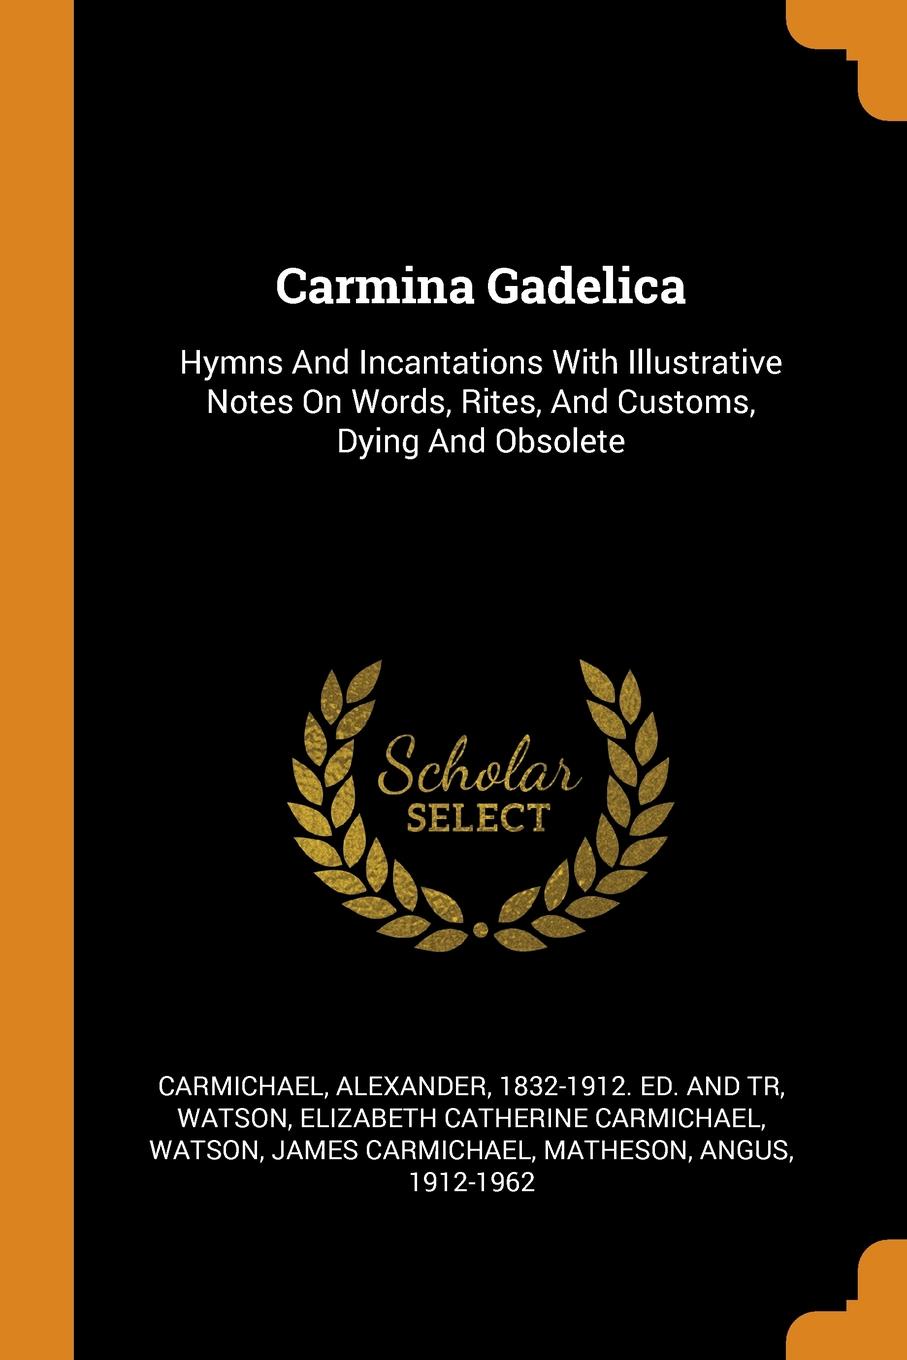 Carmina Gadelica. Hymns And Incantations With Illustrative Notes On Words, Rites, And Customs, Dying And Obsolete